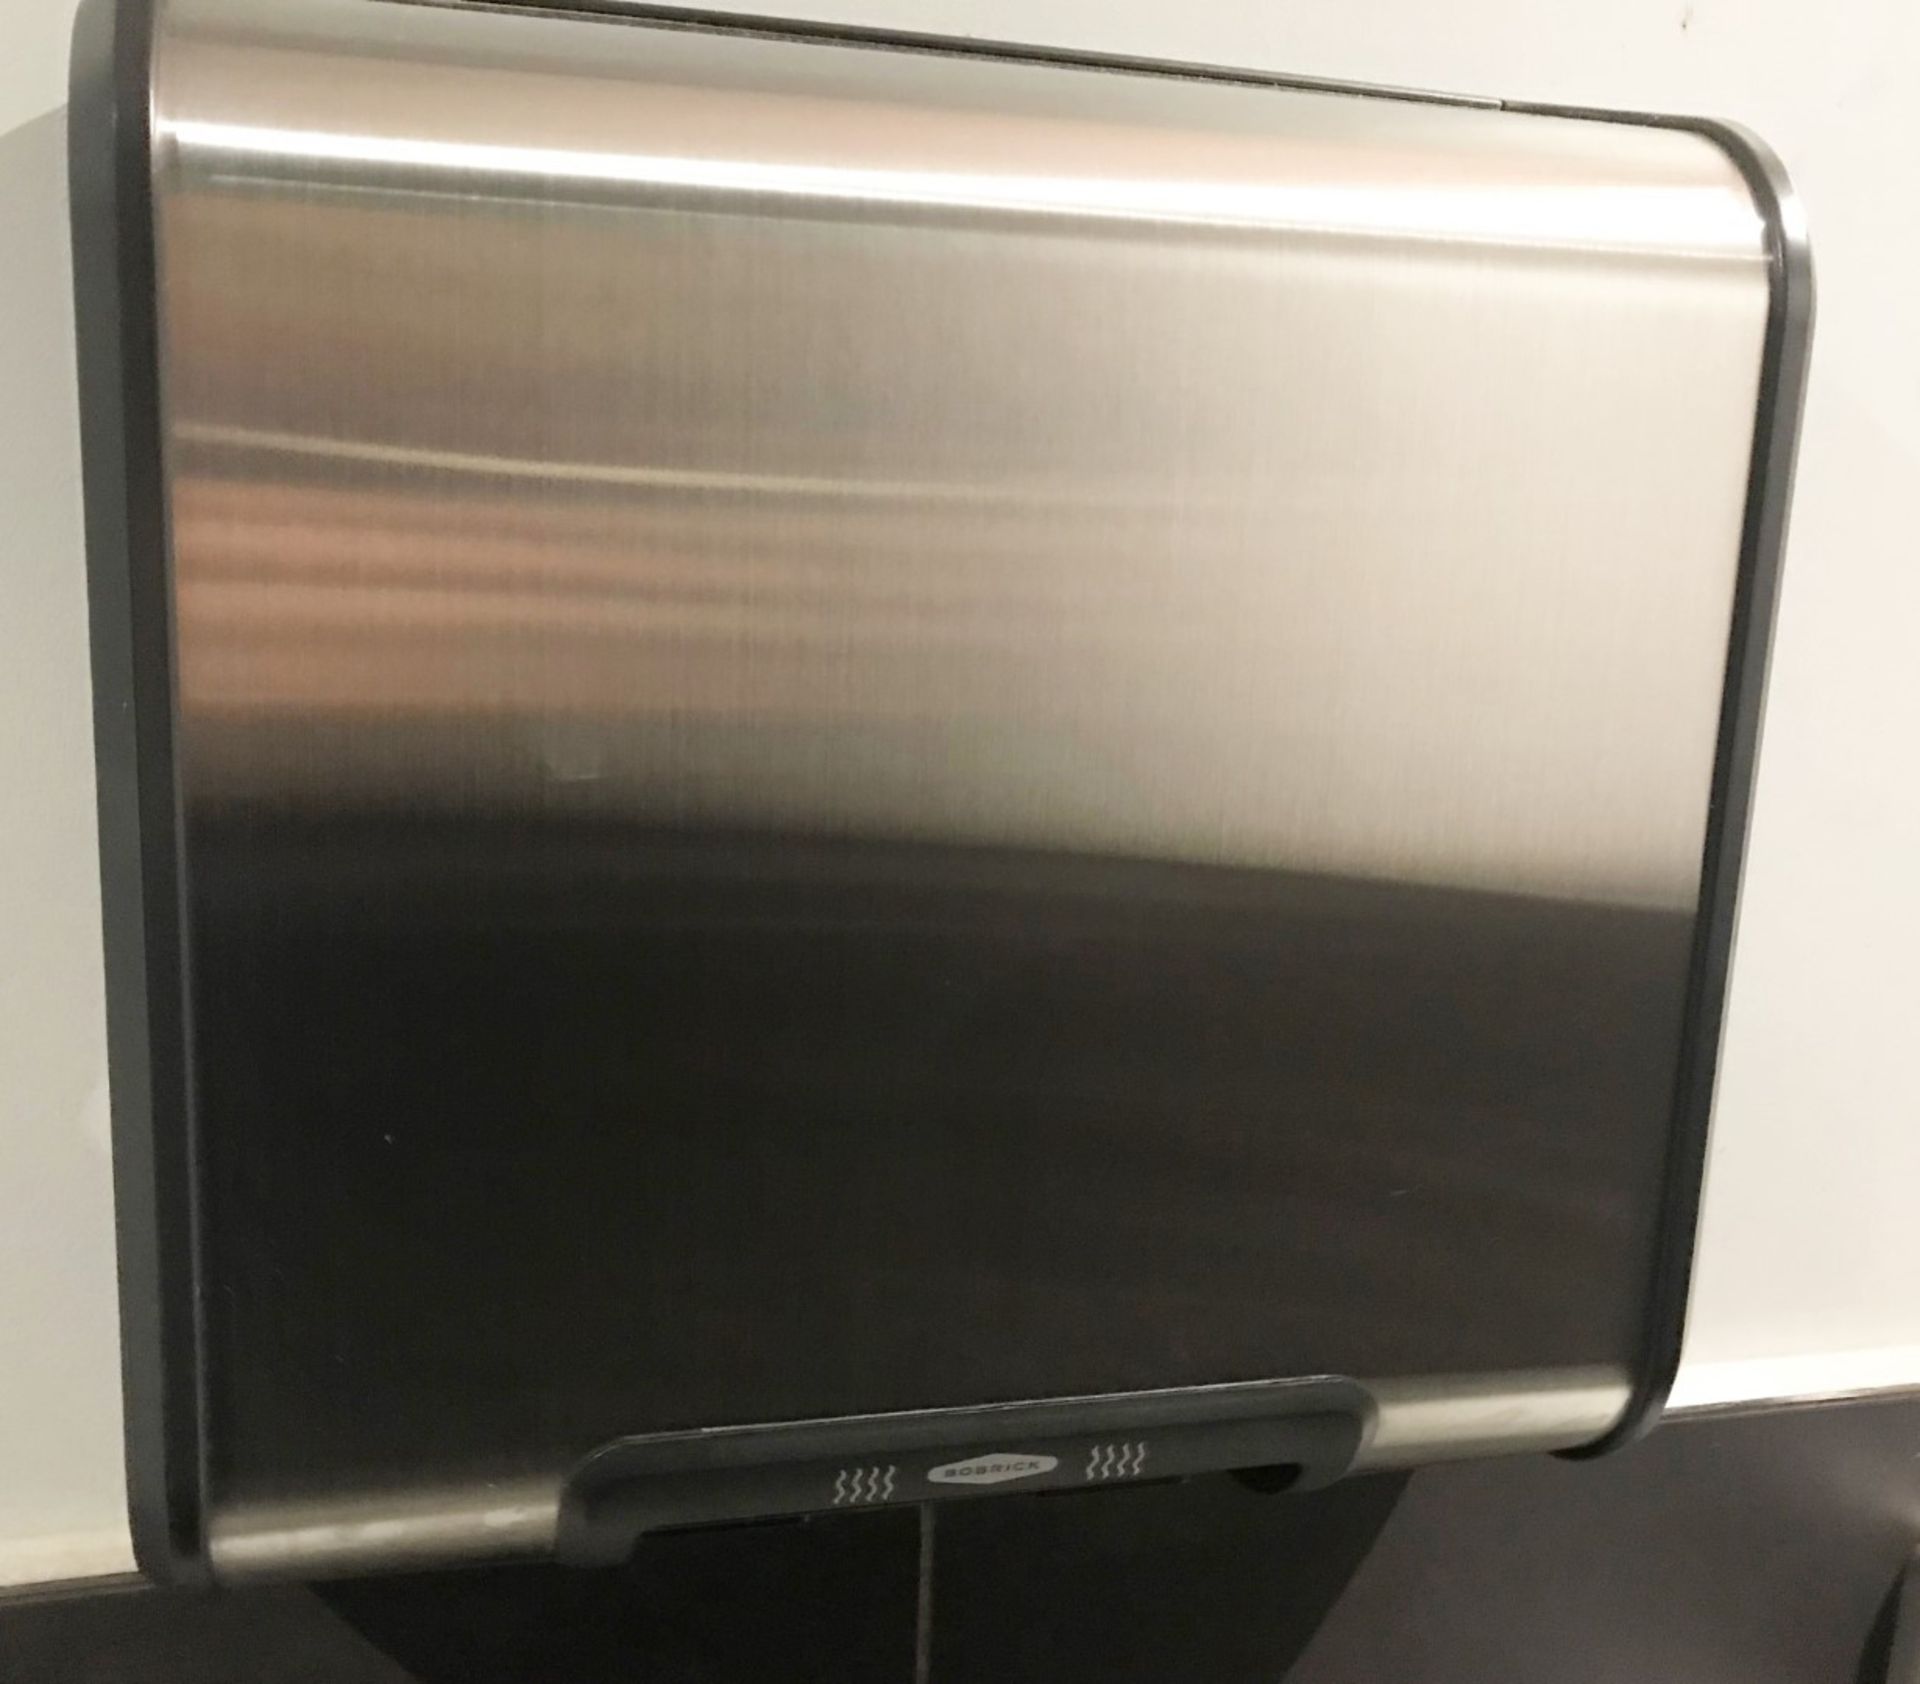 1 x Bobrick B-7128 Trimline Hand Dryer in Brushed Stainless Steel - 230v - Just 100mm Deep, Quiet